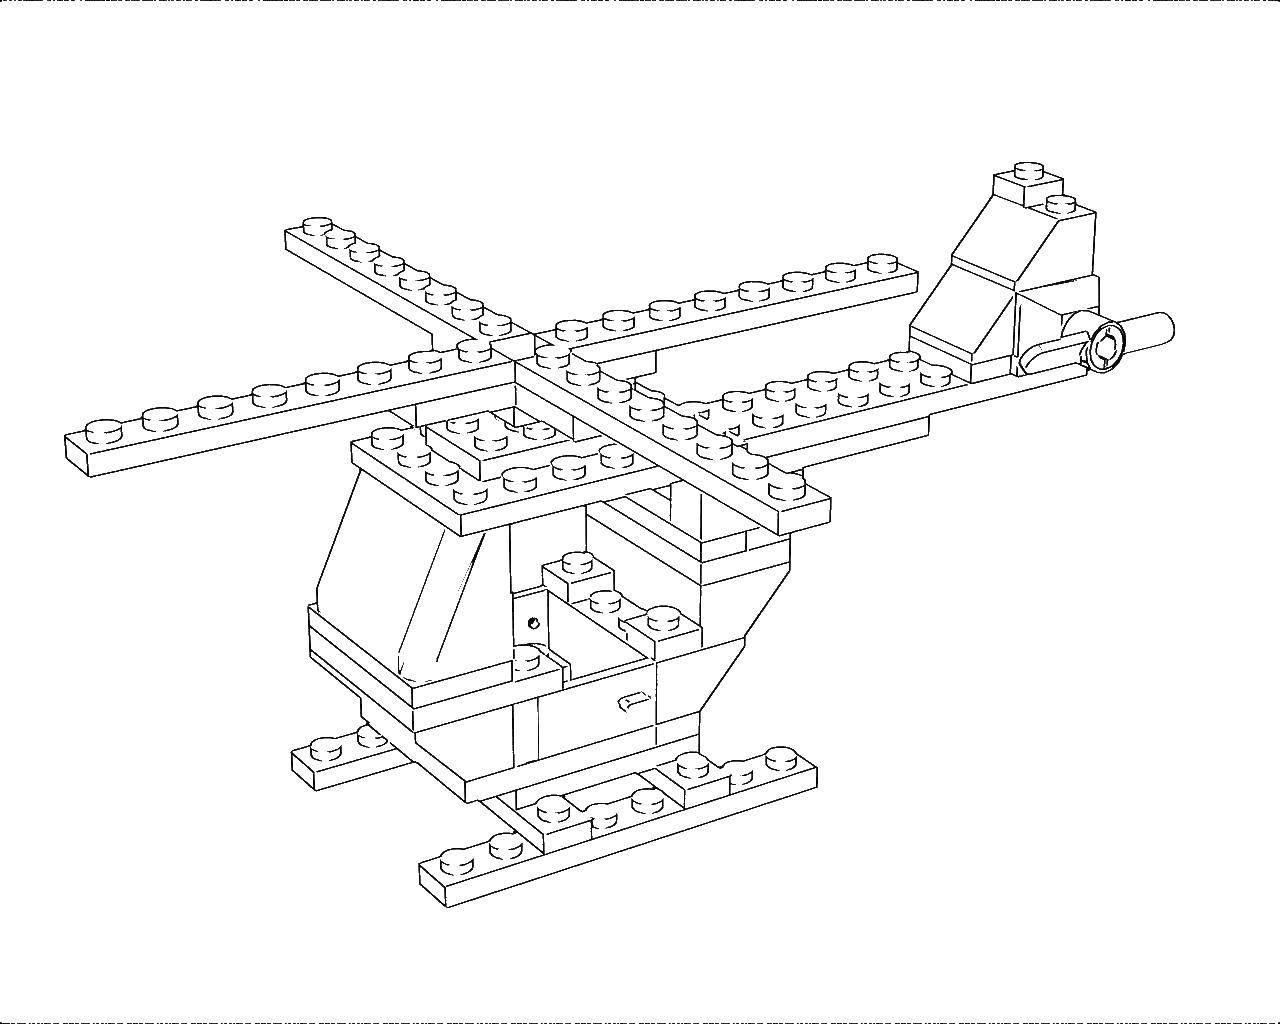 Coloring Helicopter LEGO. Category LEGO. Tags:  LEGO, helicopter, propeller.